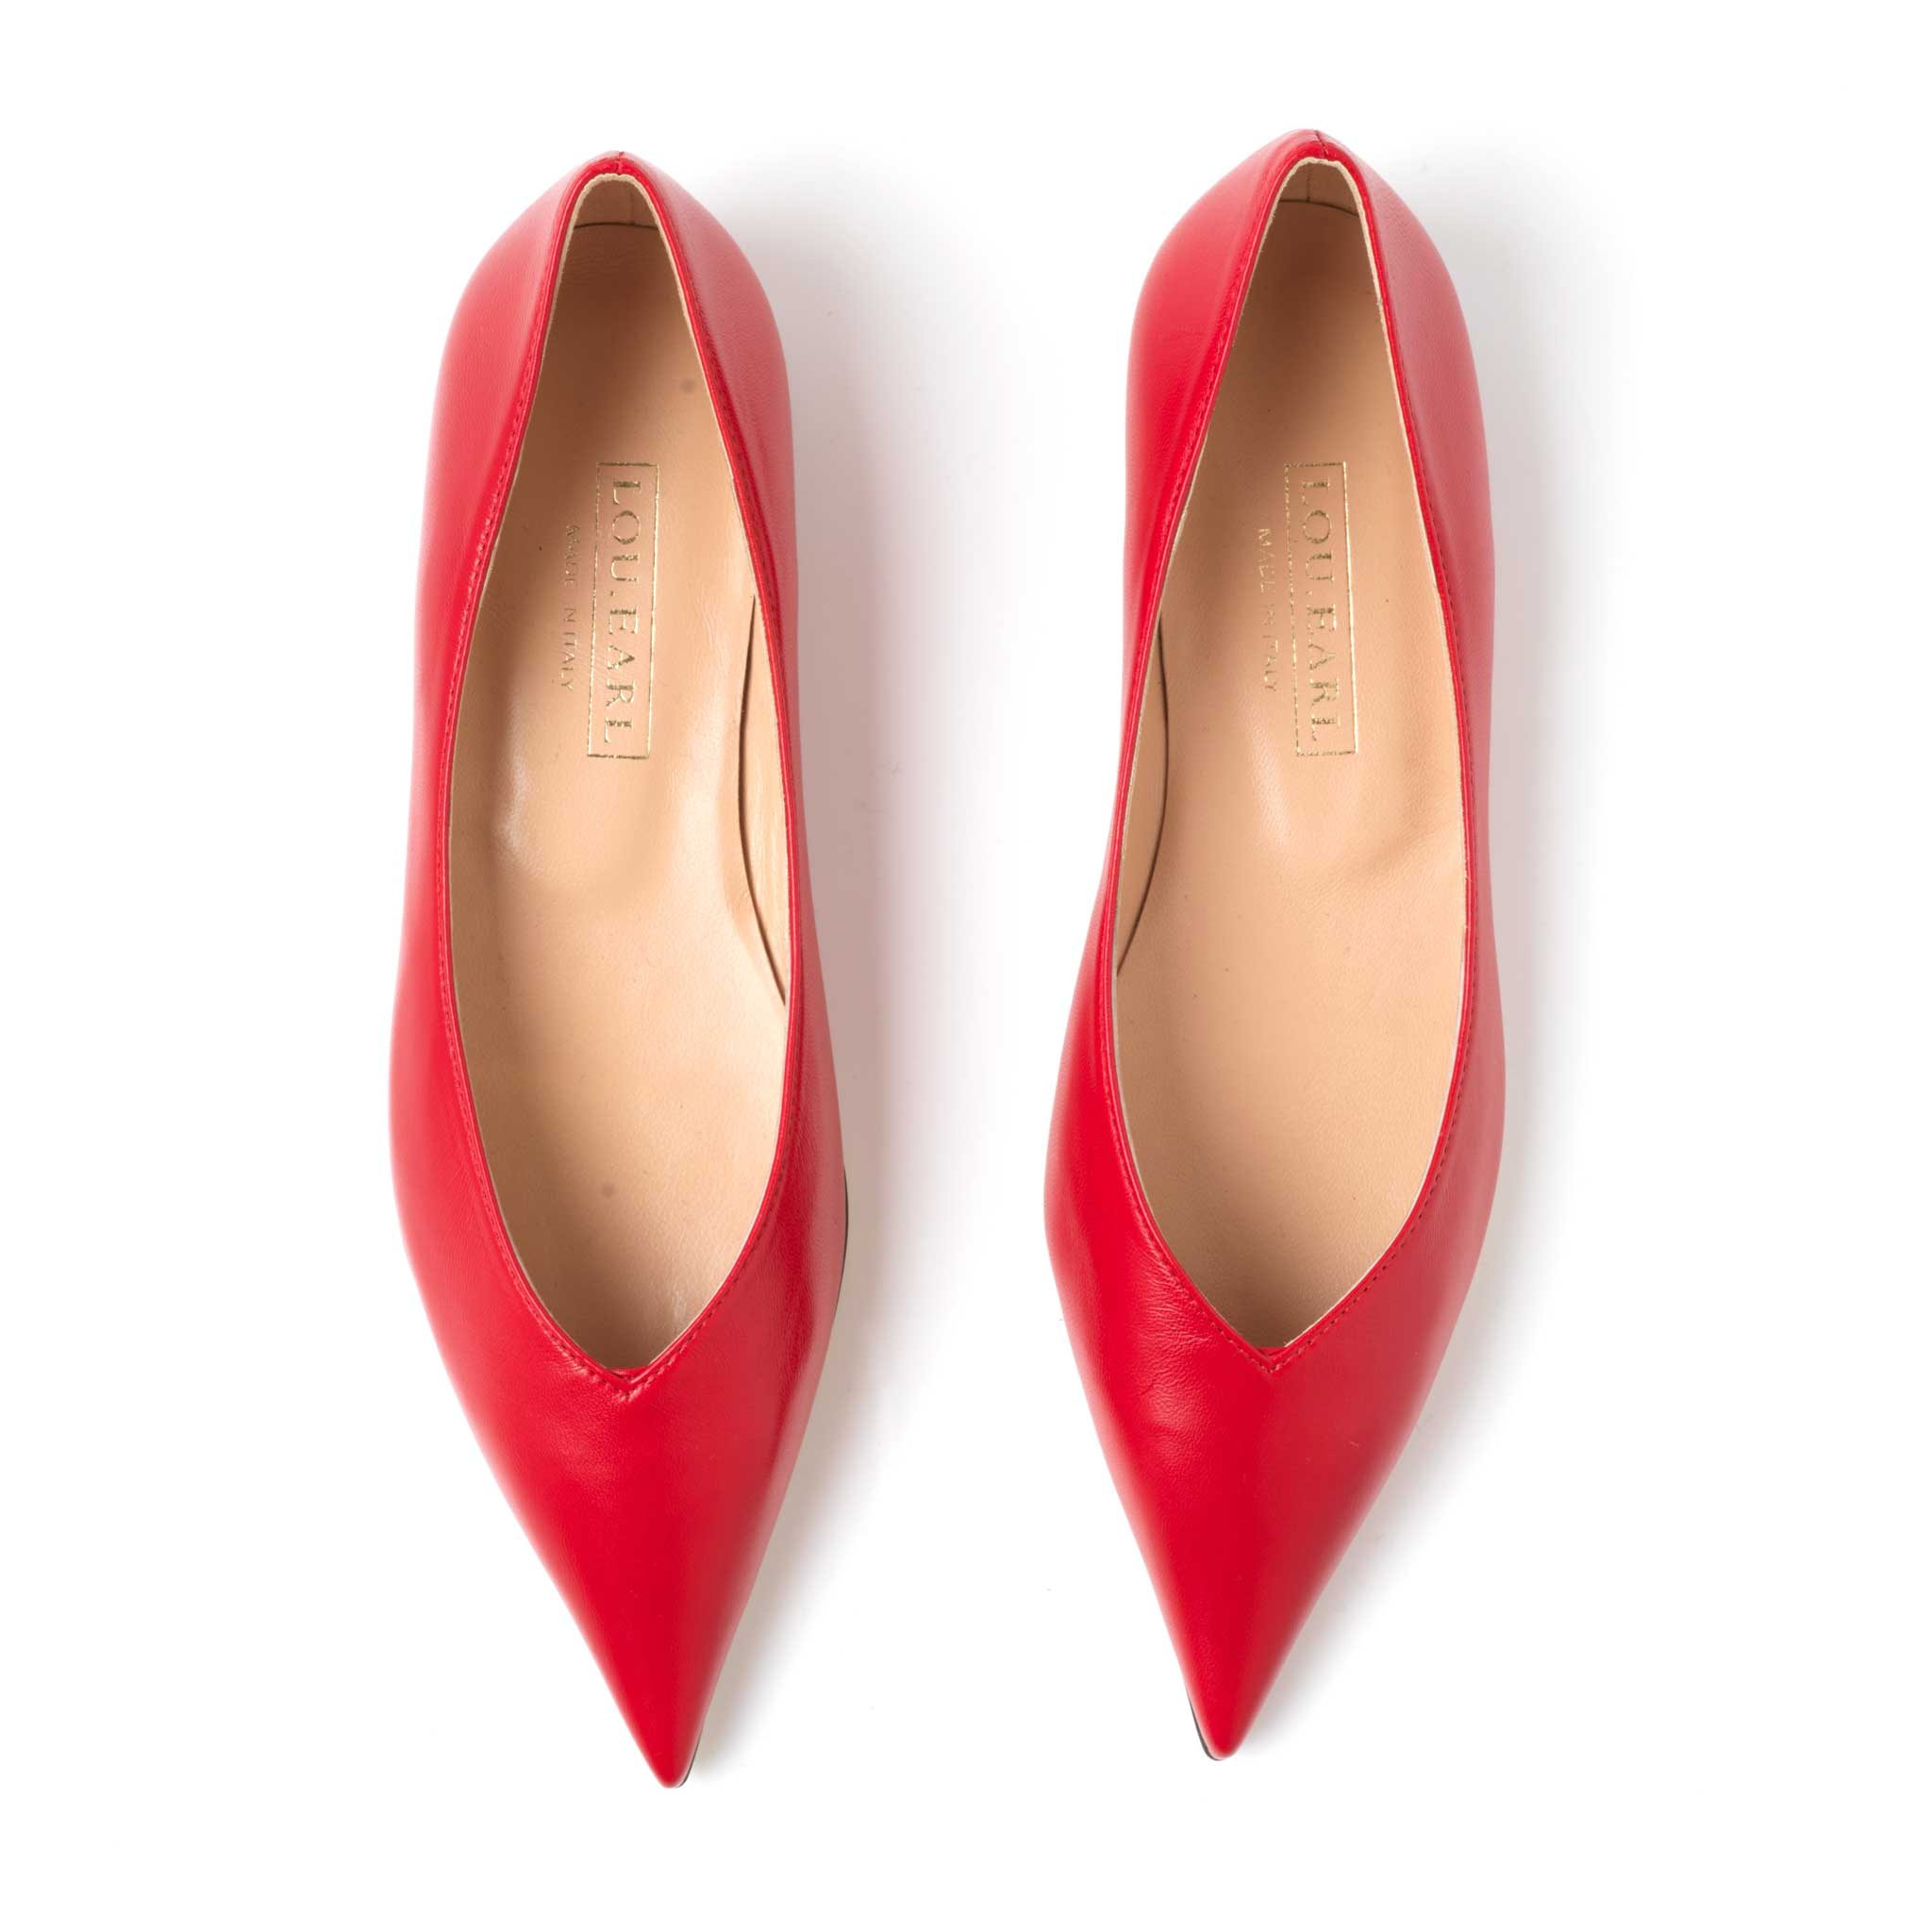 a pair of pointed toe slip on red shoes with a neutral leather color lining and gold logo